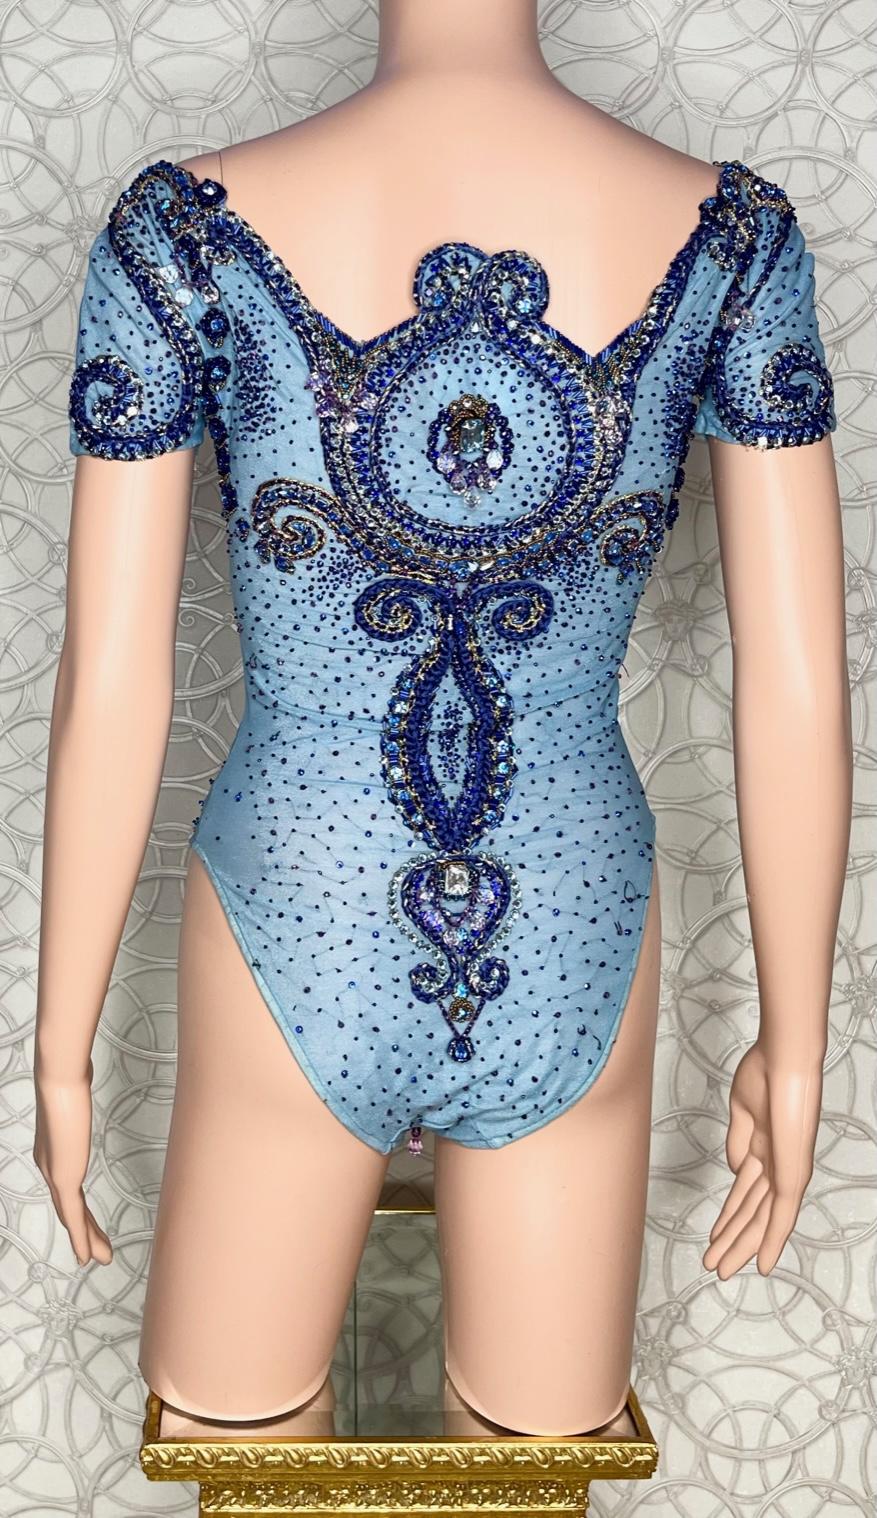 A CREPE DE CHINE BODY SUIT from MIAMI MANSION GIANNI VERSACE PERSONAL COLLECTION For Sale 2